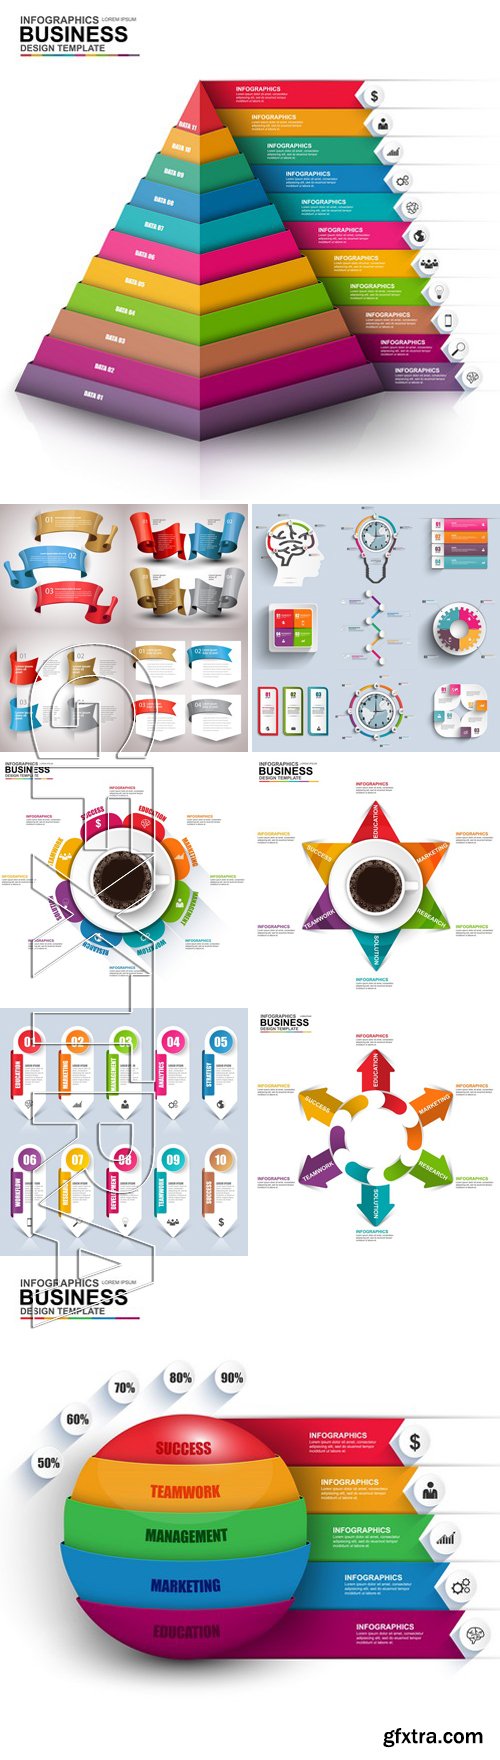 Stock Vectors - Business Infographic Template 42